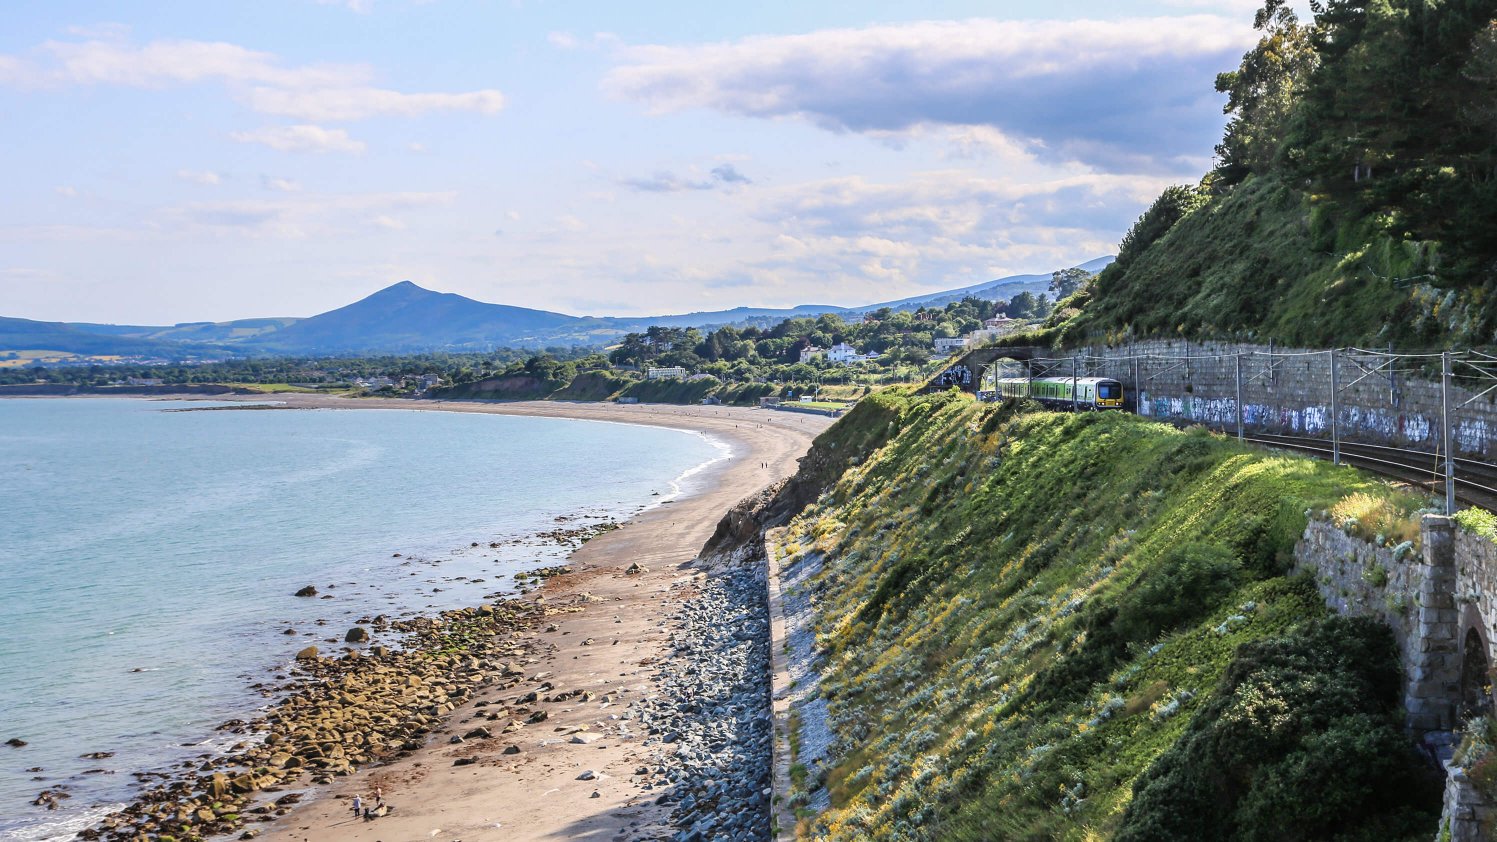 A DART train makes its way along Killiney Bay with the Sugarloaf mountain in the background